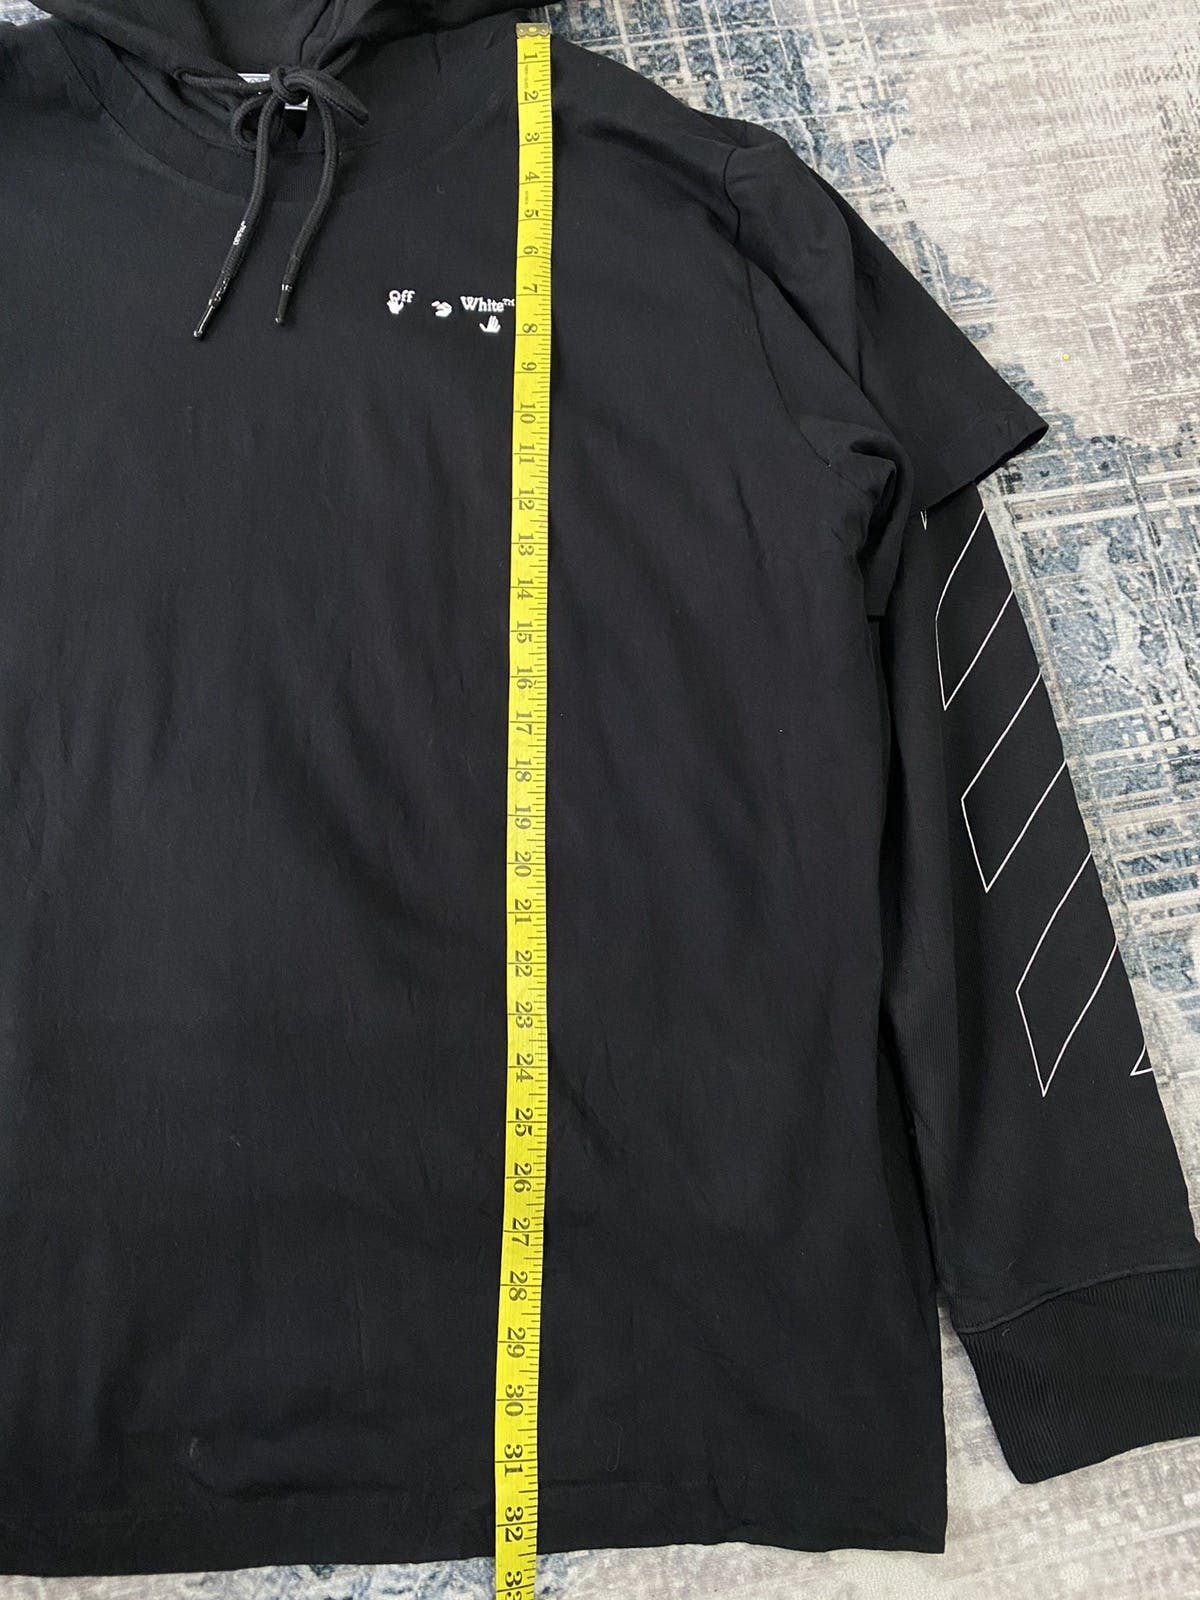 Off-White Virgil Abloh Hoodie Double Layer Connected T-Shirt - 14